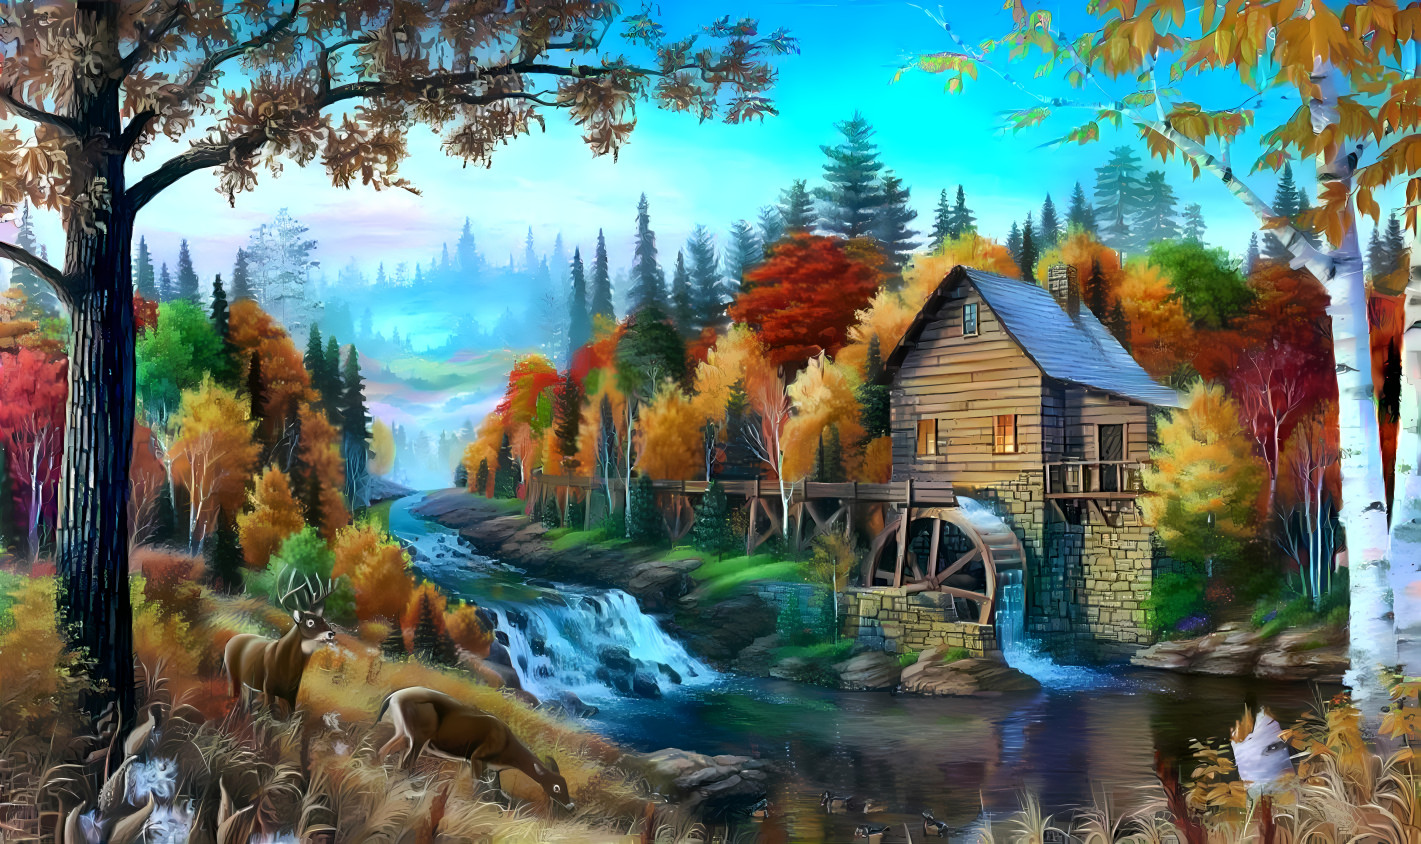 Water Mill.